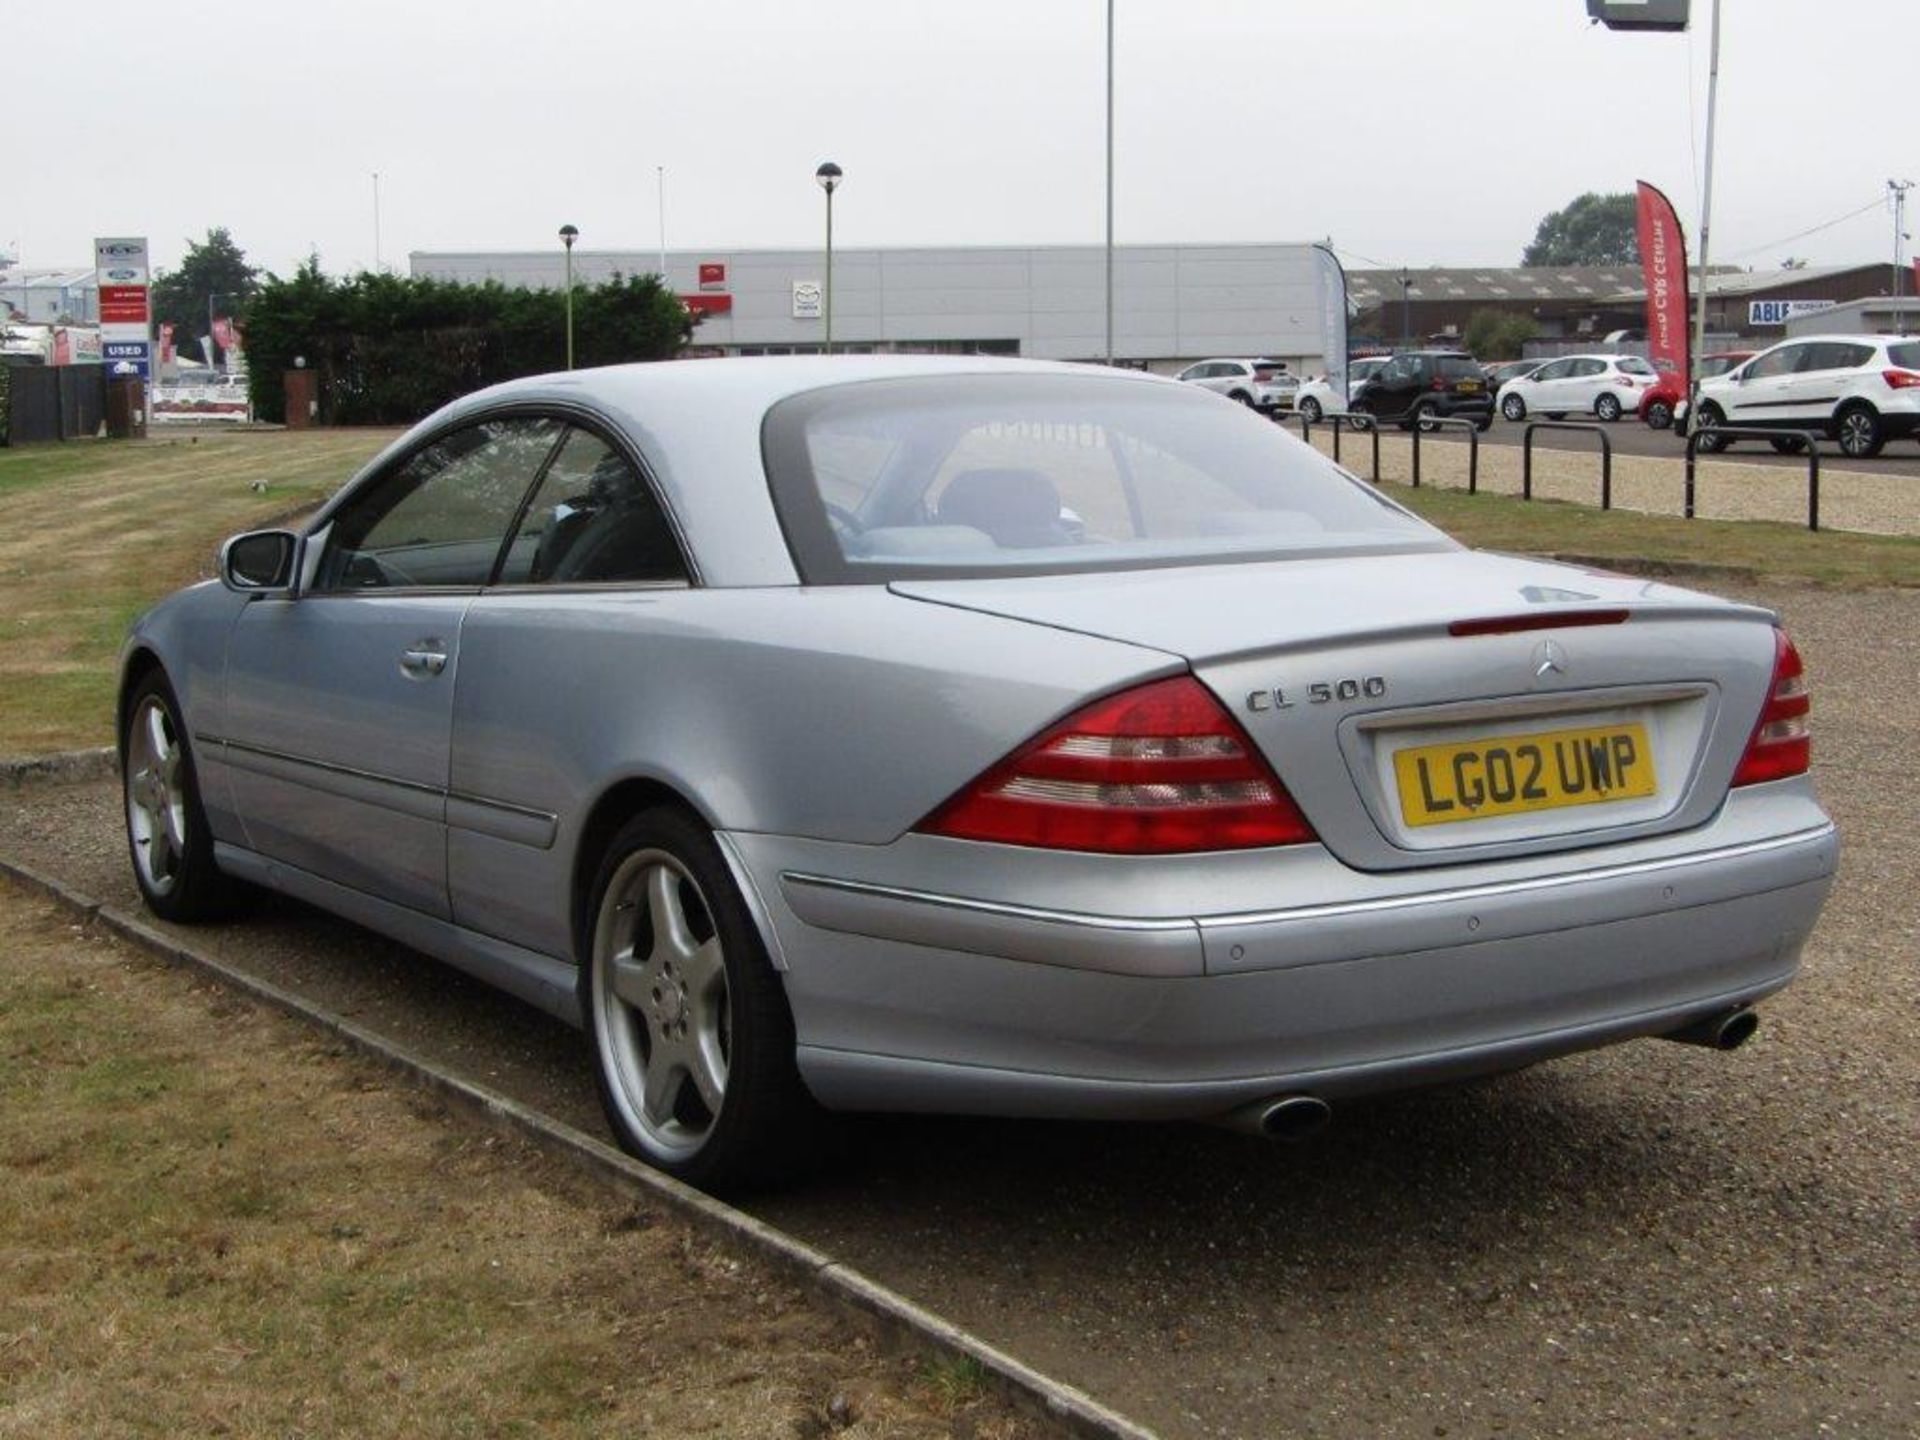 2002 Mercedes CL500 Coupe - Image 4 of 12